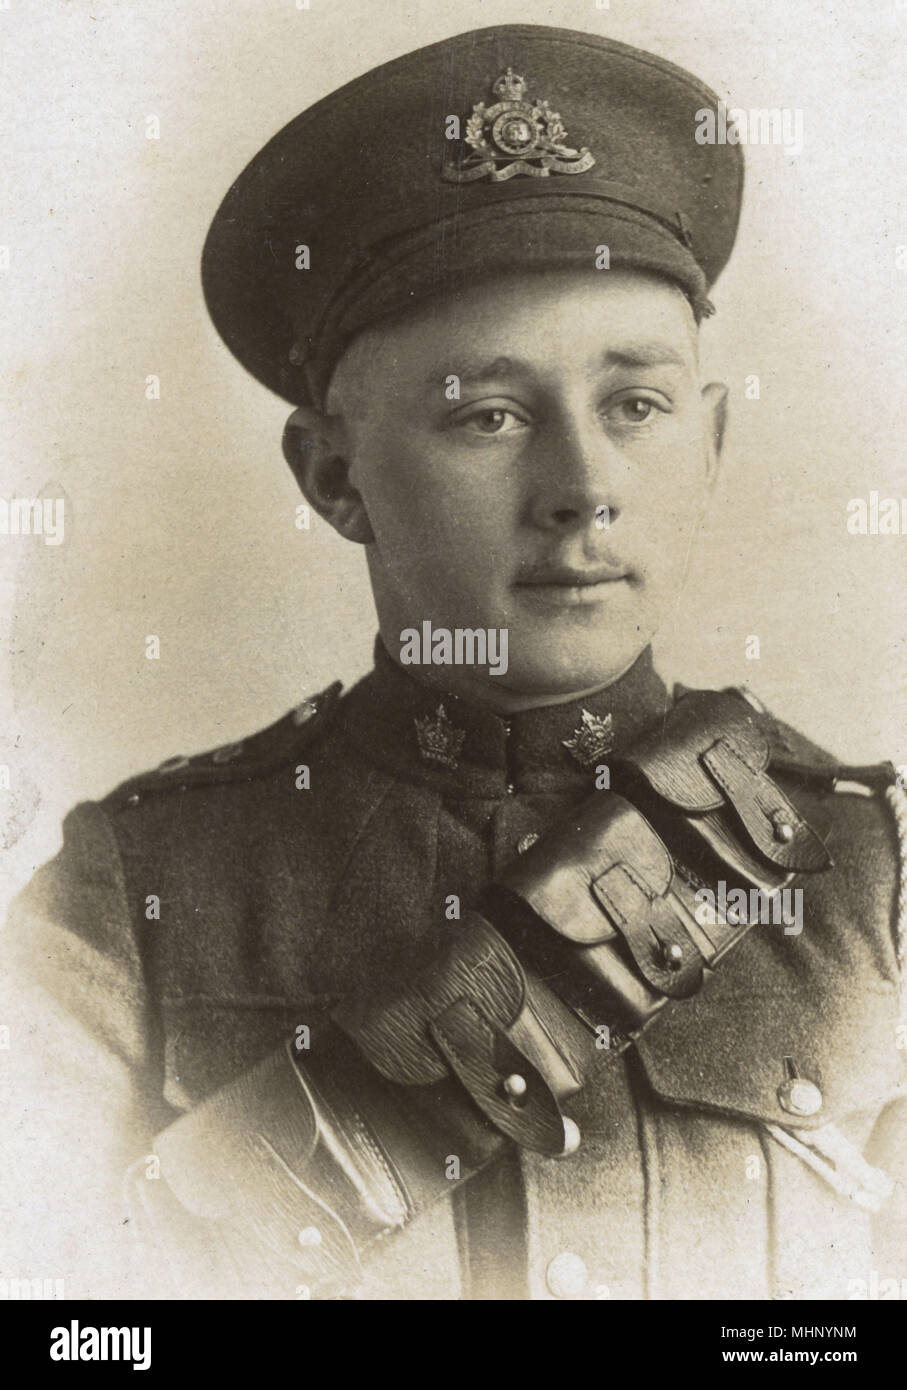 Soldier of the Canadian 53rd Field Artillery, Canadian Expeditionary Force, towards the end of the First World War.      Date: circa 1918 Stock Photo